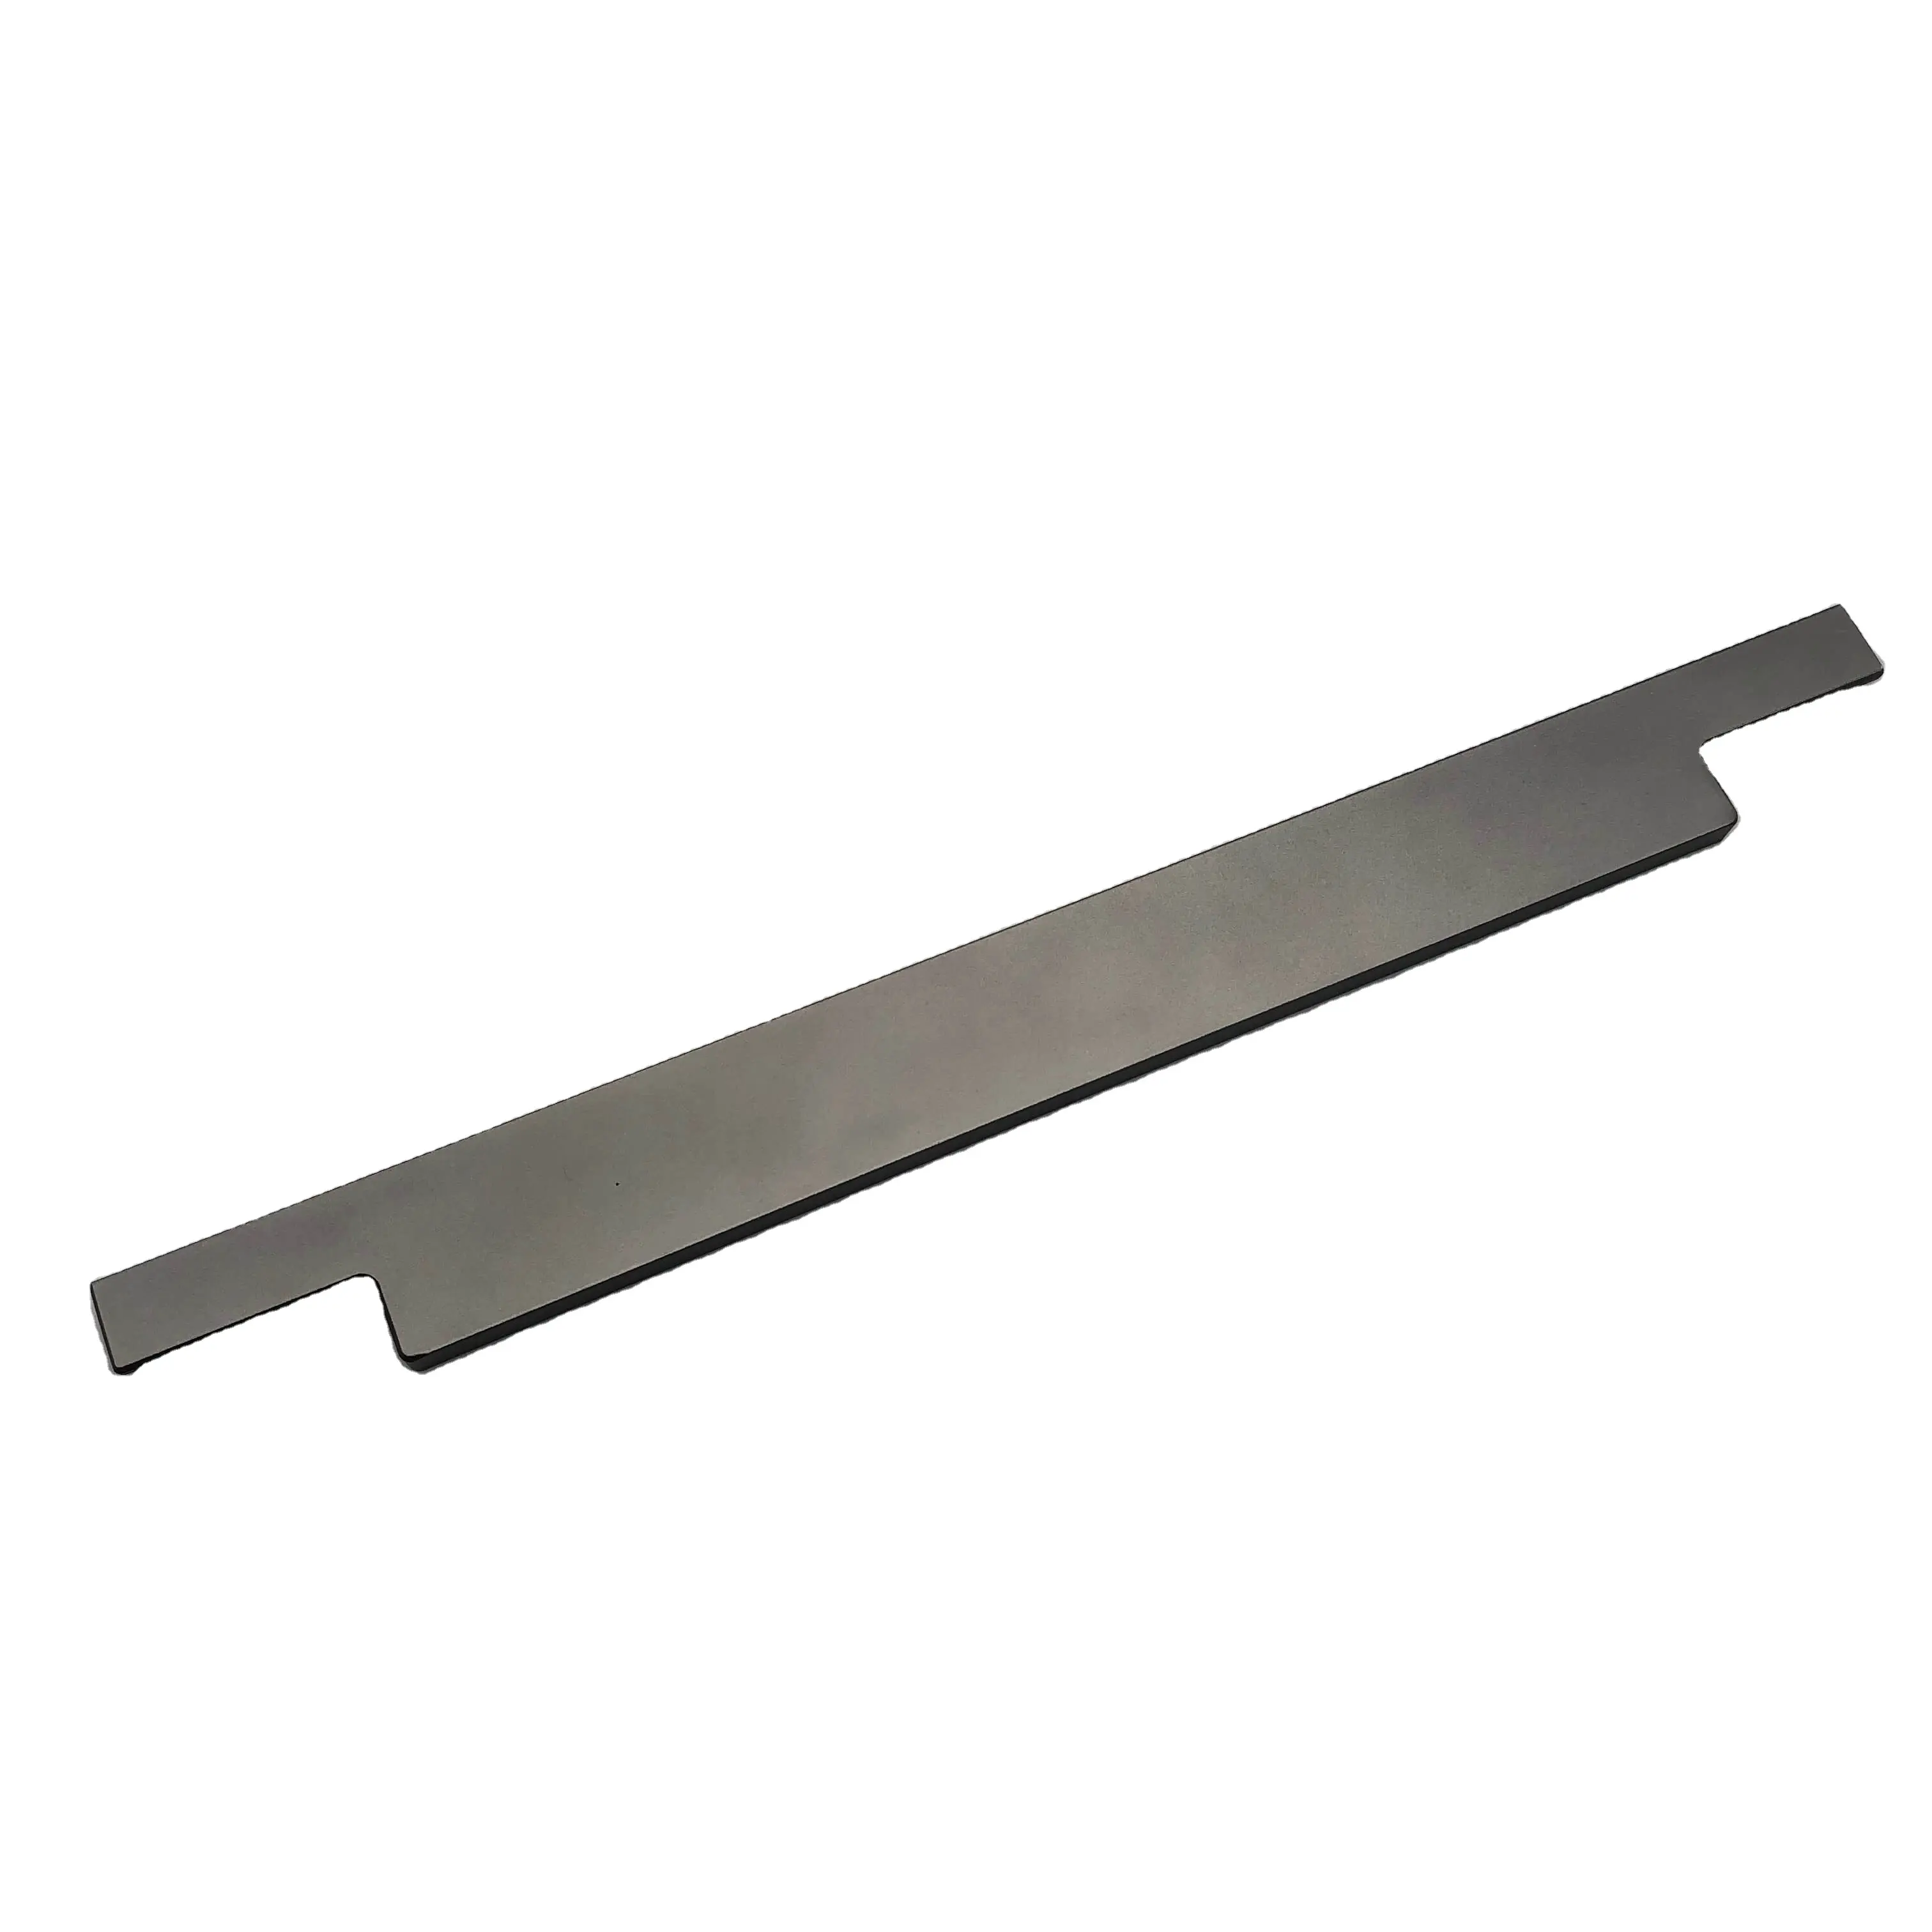 High Quality Customized Aluminum Handle For Apartment Cabinet Door Pull Handles Replacement